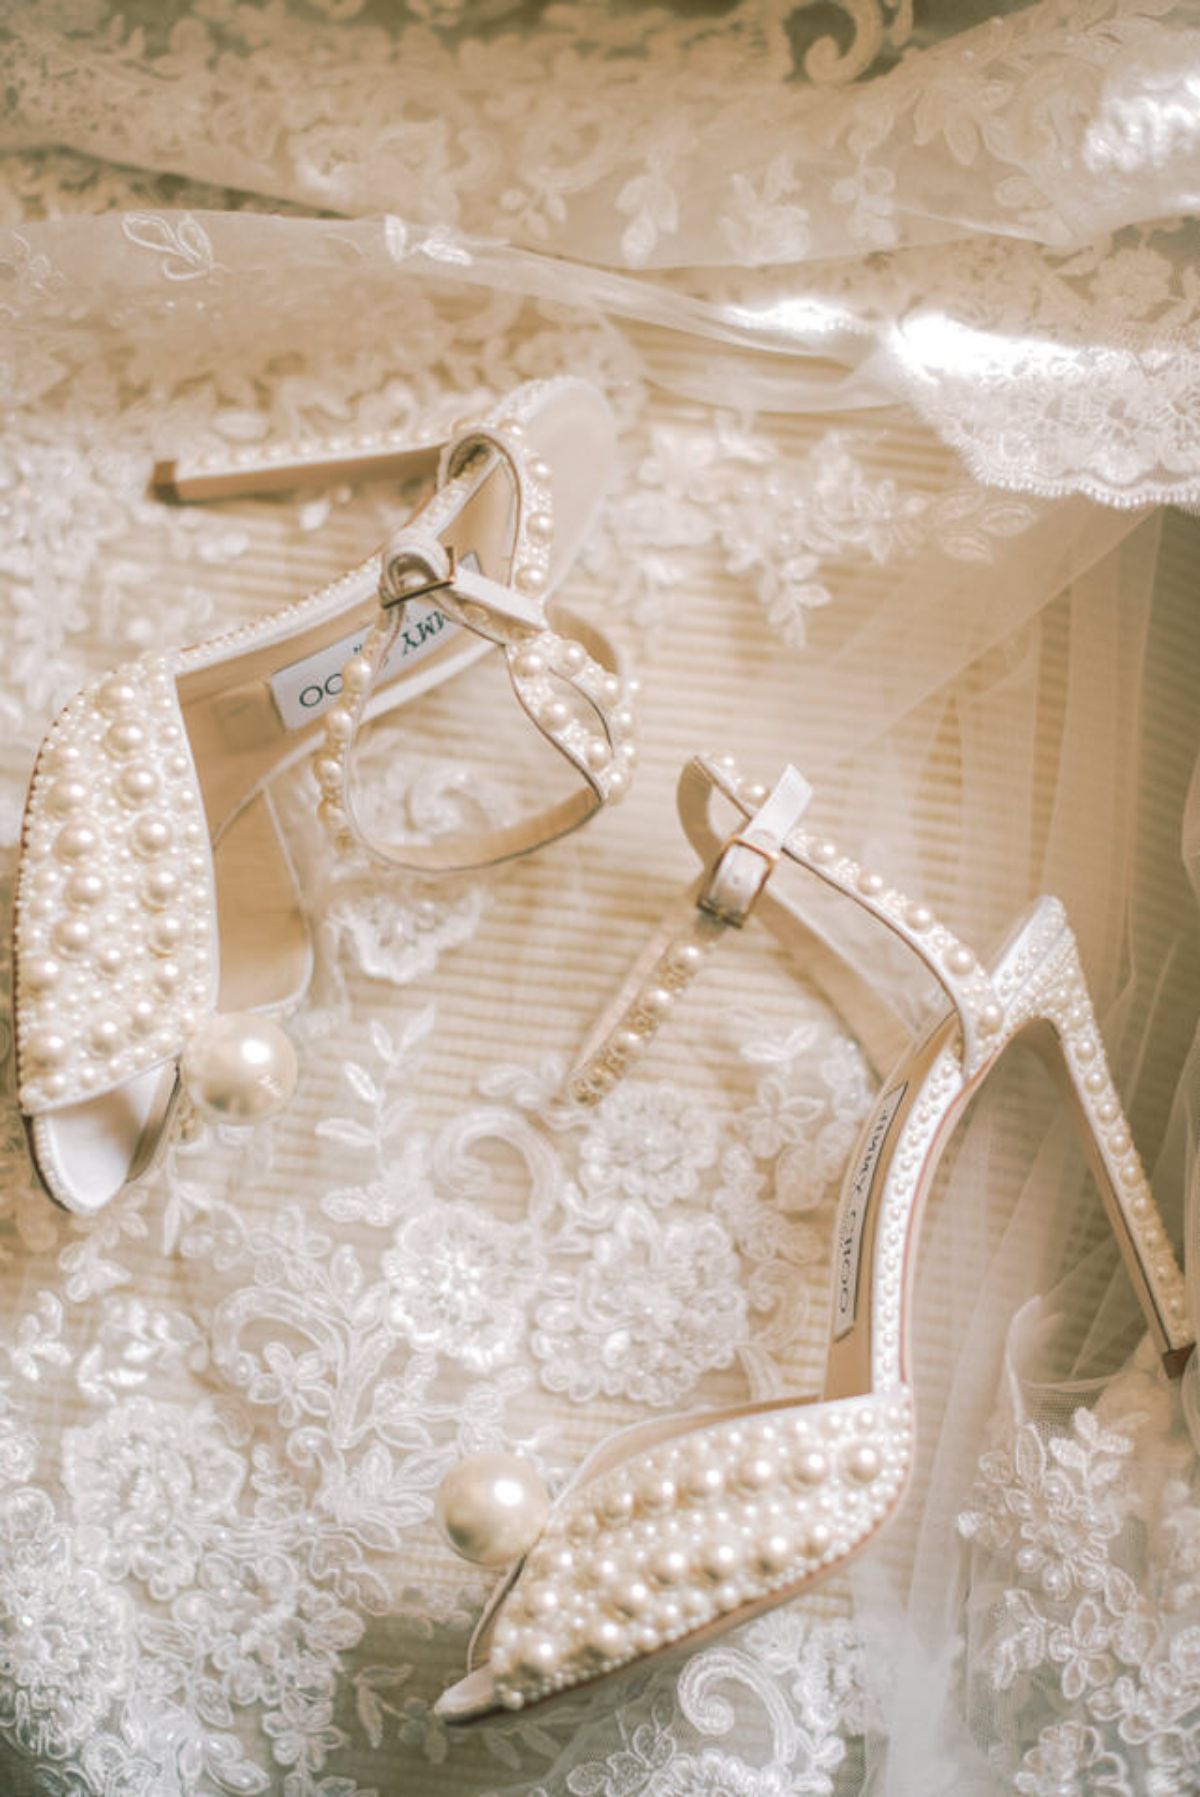 Classy Jimmy Choo Wedding Shoes with Embelishment for your Walk